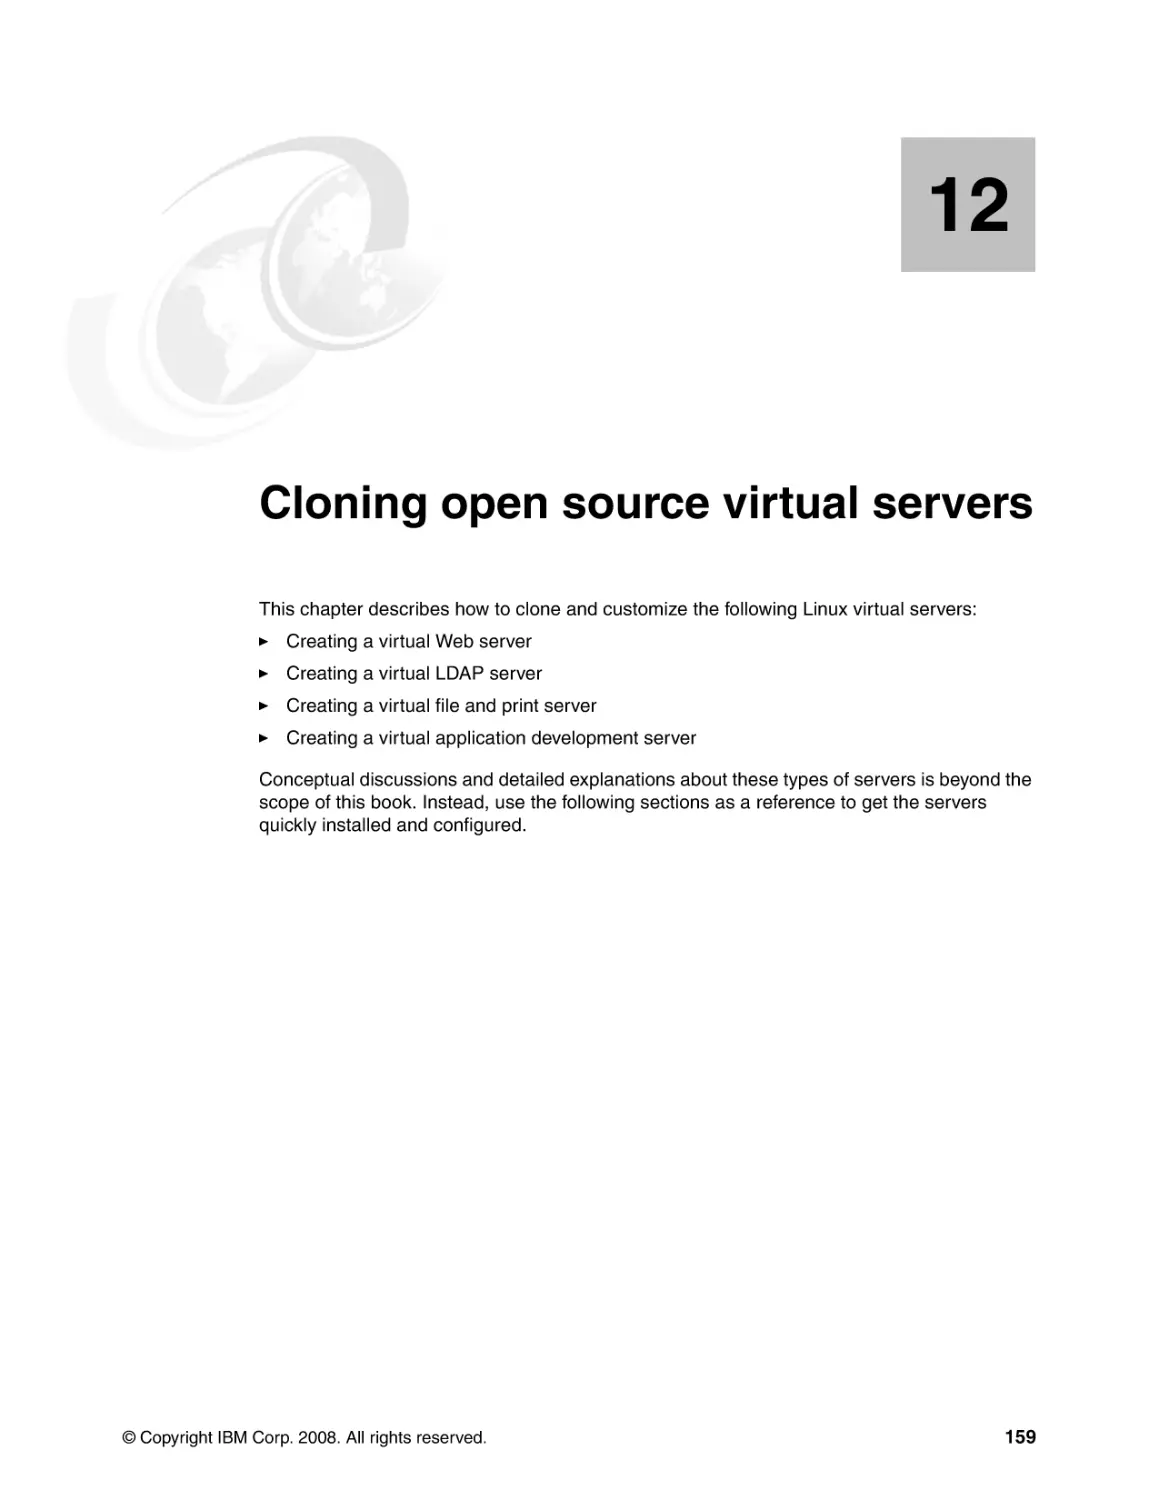 Chapter 12. Cloning open source virtual servers